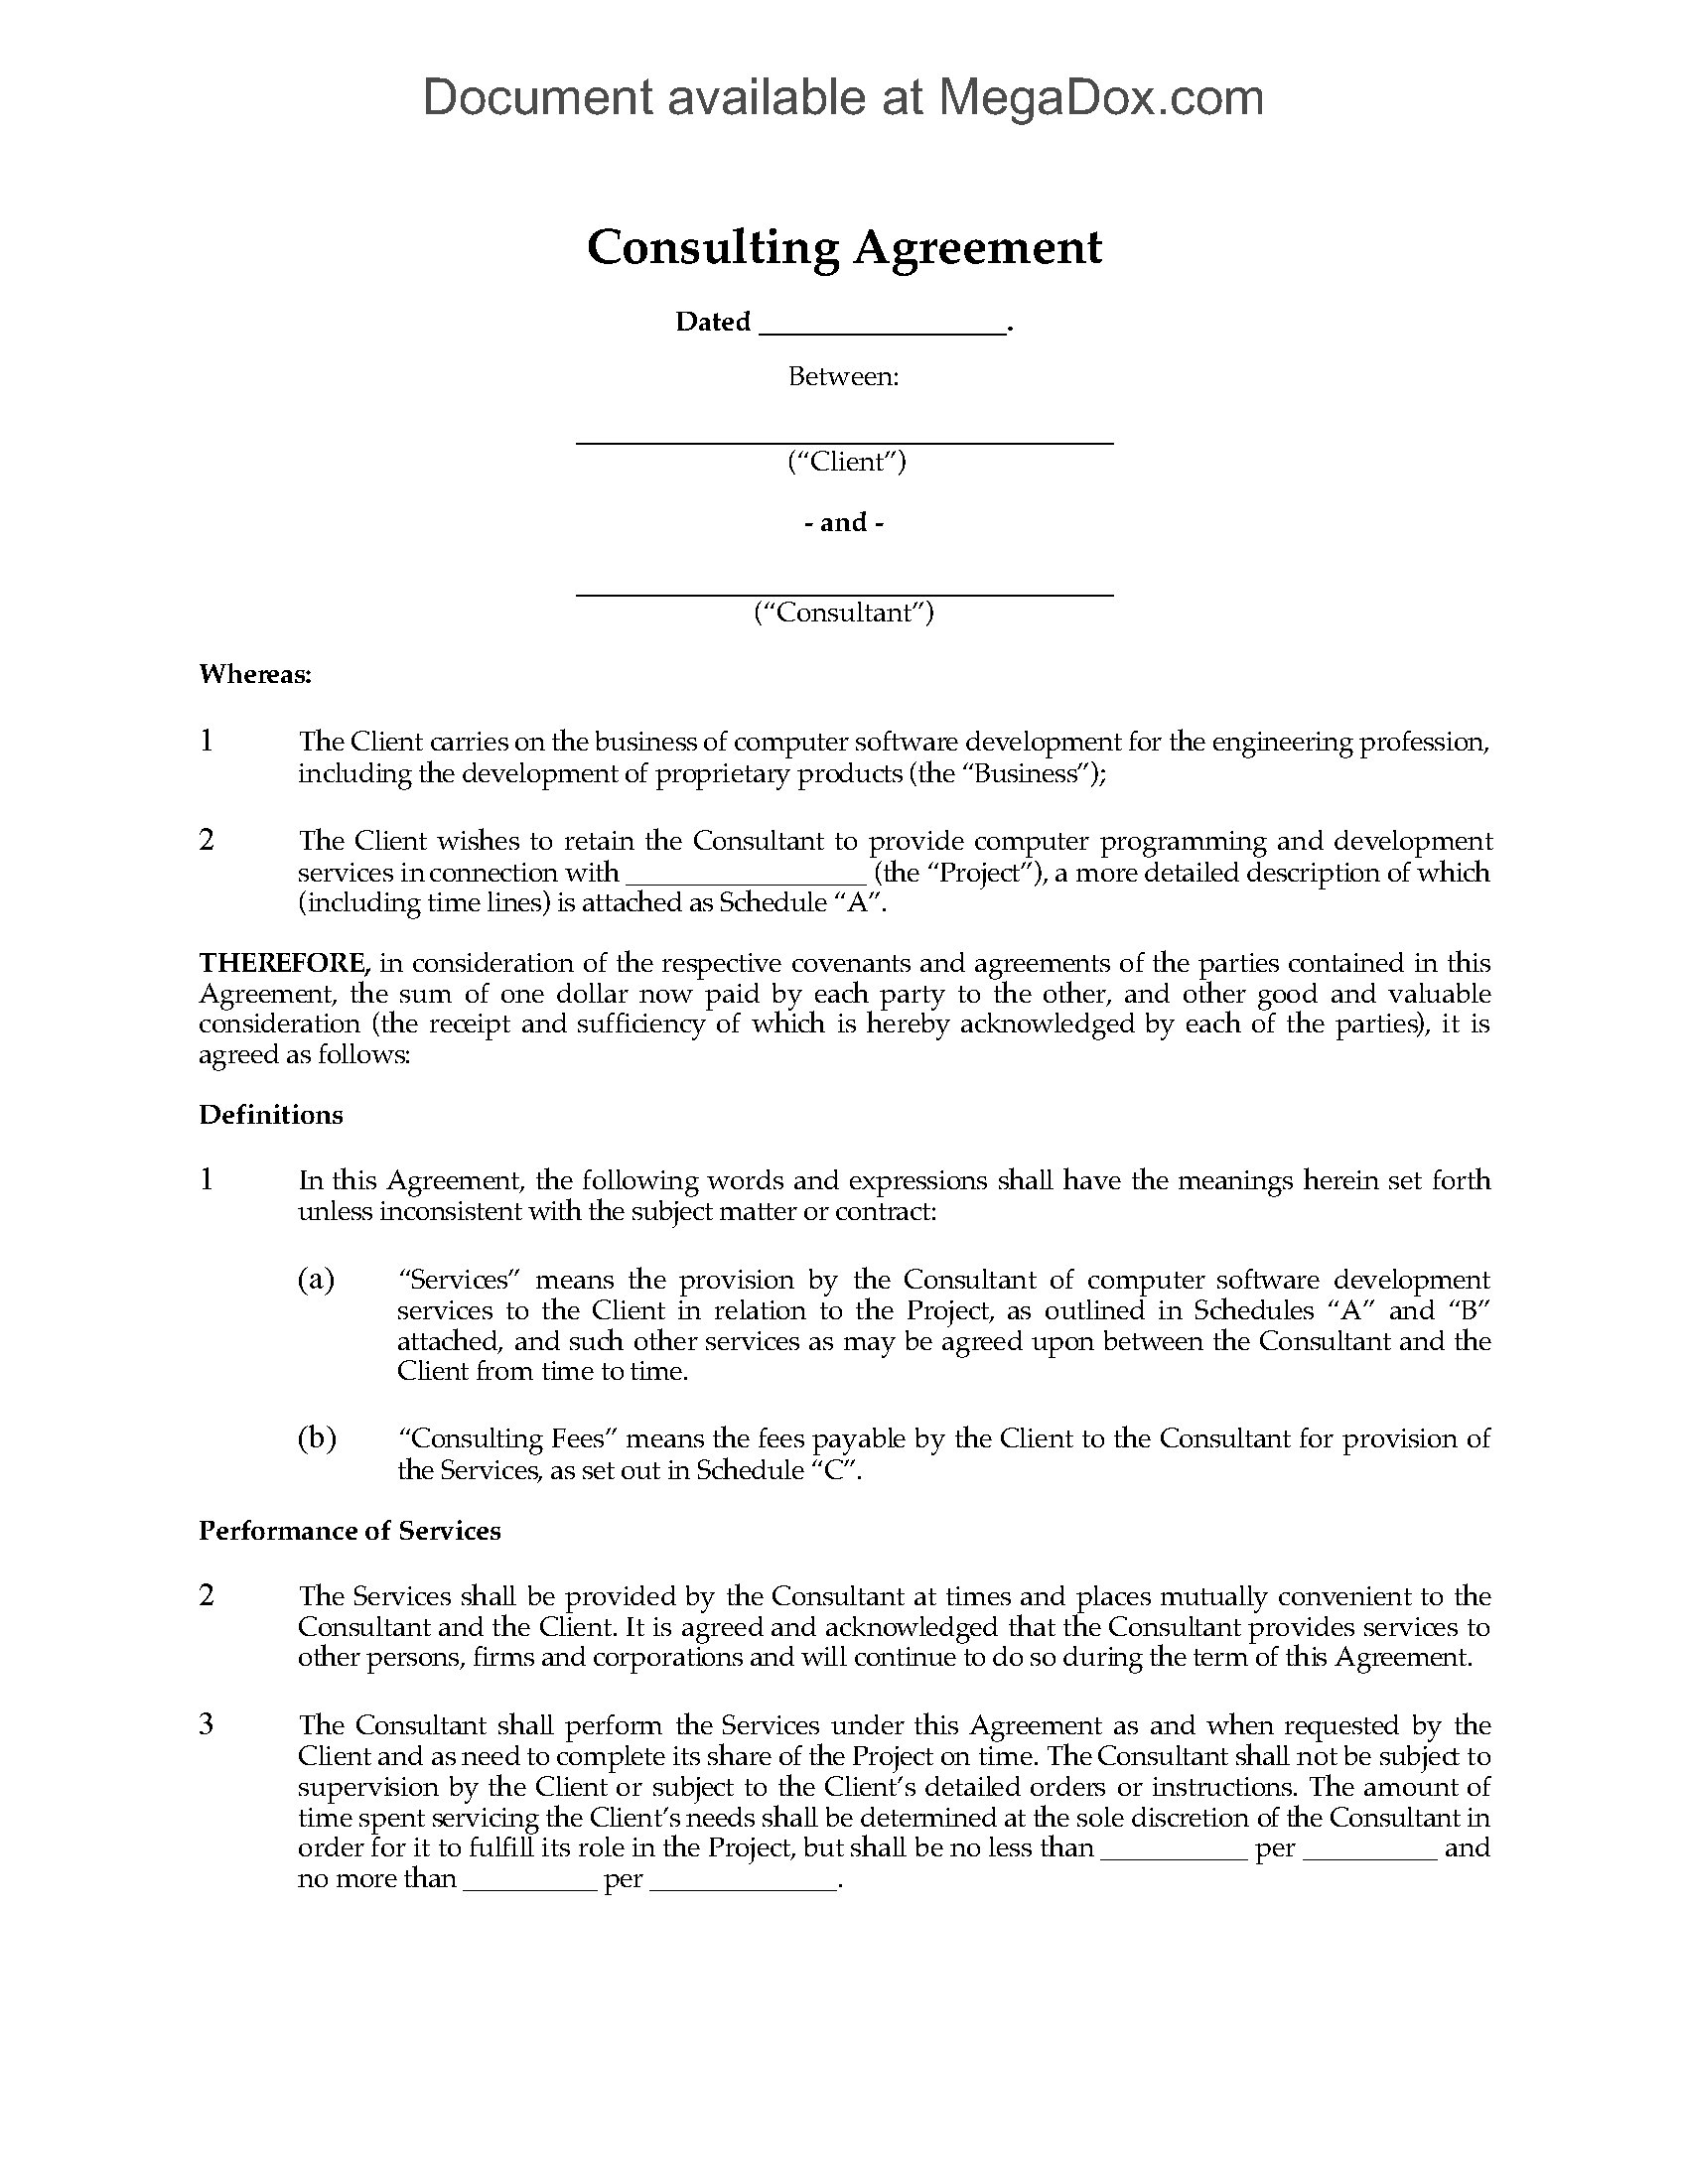 Software Agreement Contract Consulting Agreement For Software Development Canada